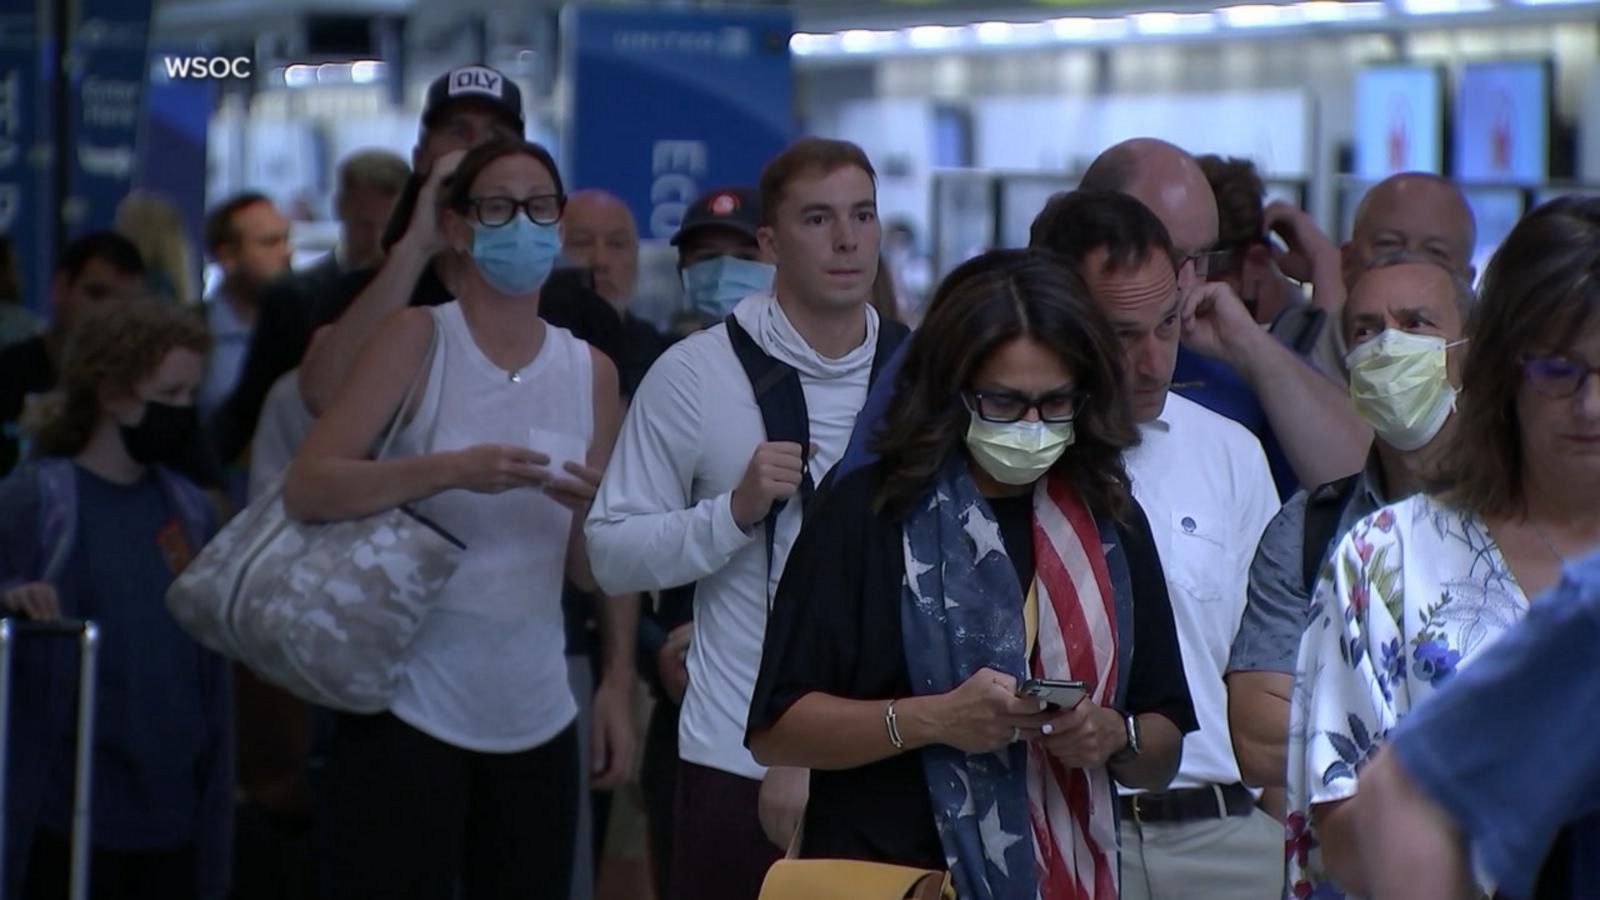 VIDEO: Travel chaos as record number of Americans expected to return home after July 4